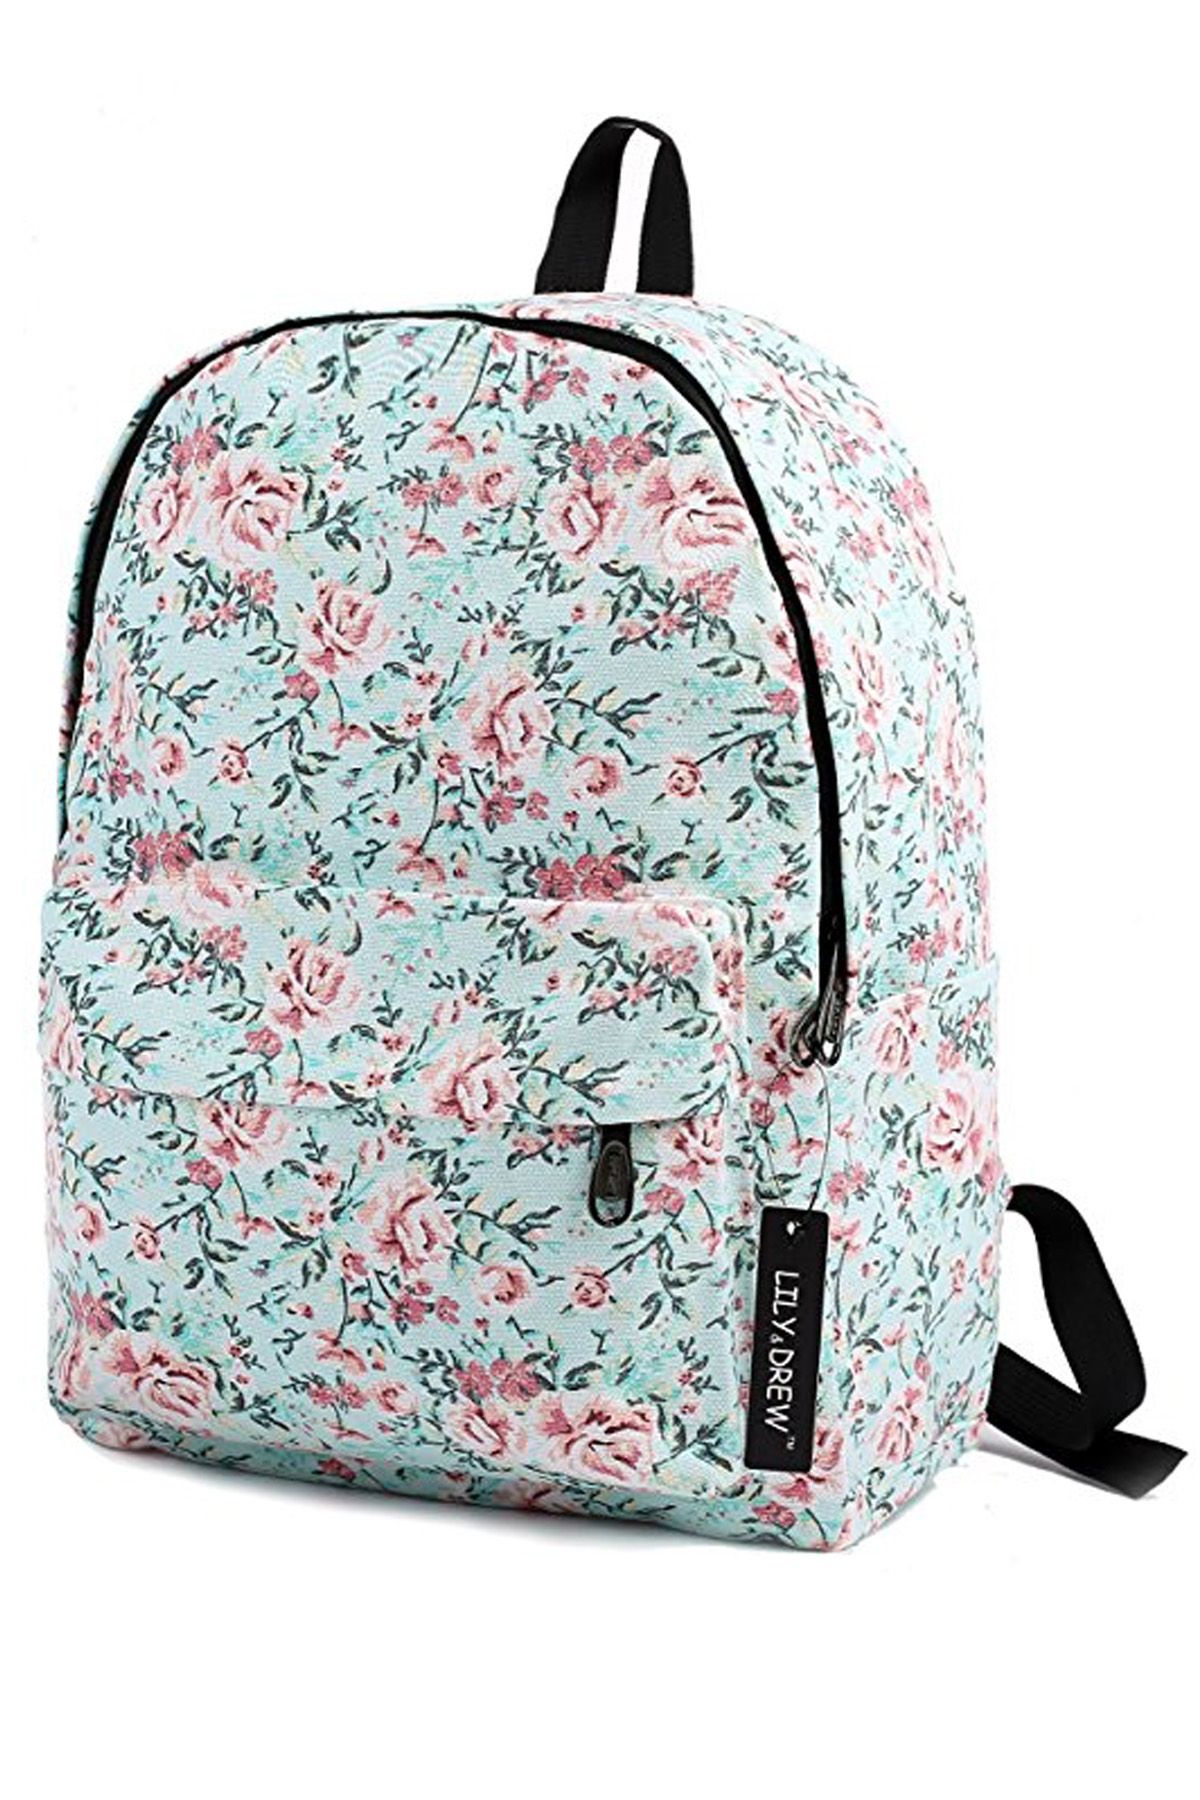 Concentratie Luchtpost Verraad 18 Cool Back-to-School Backpacks - Cheap Book Bags for School